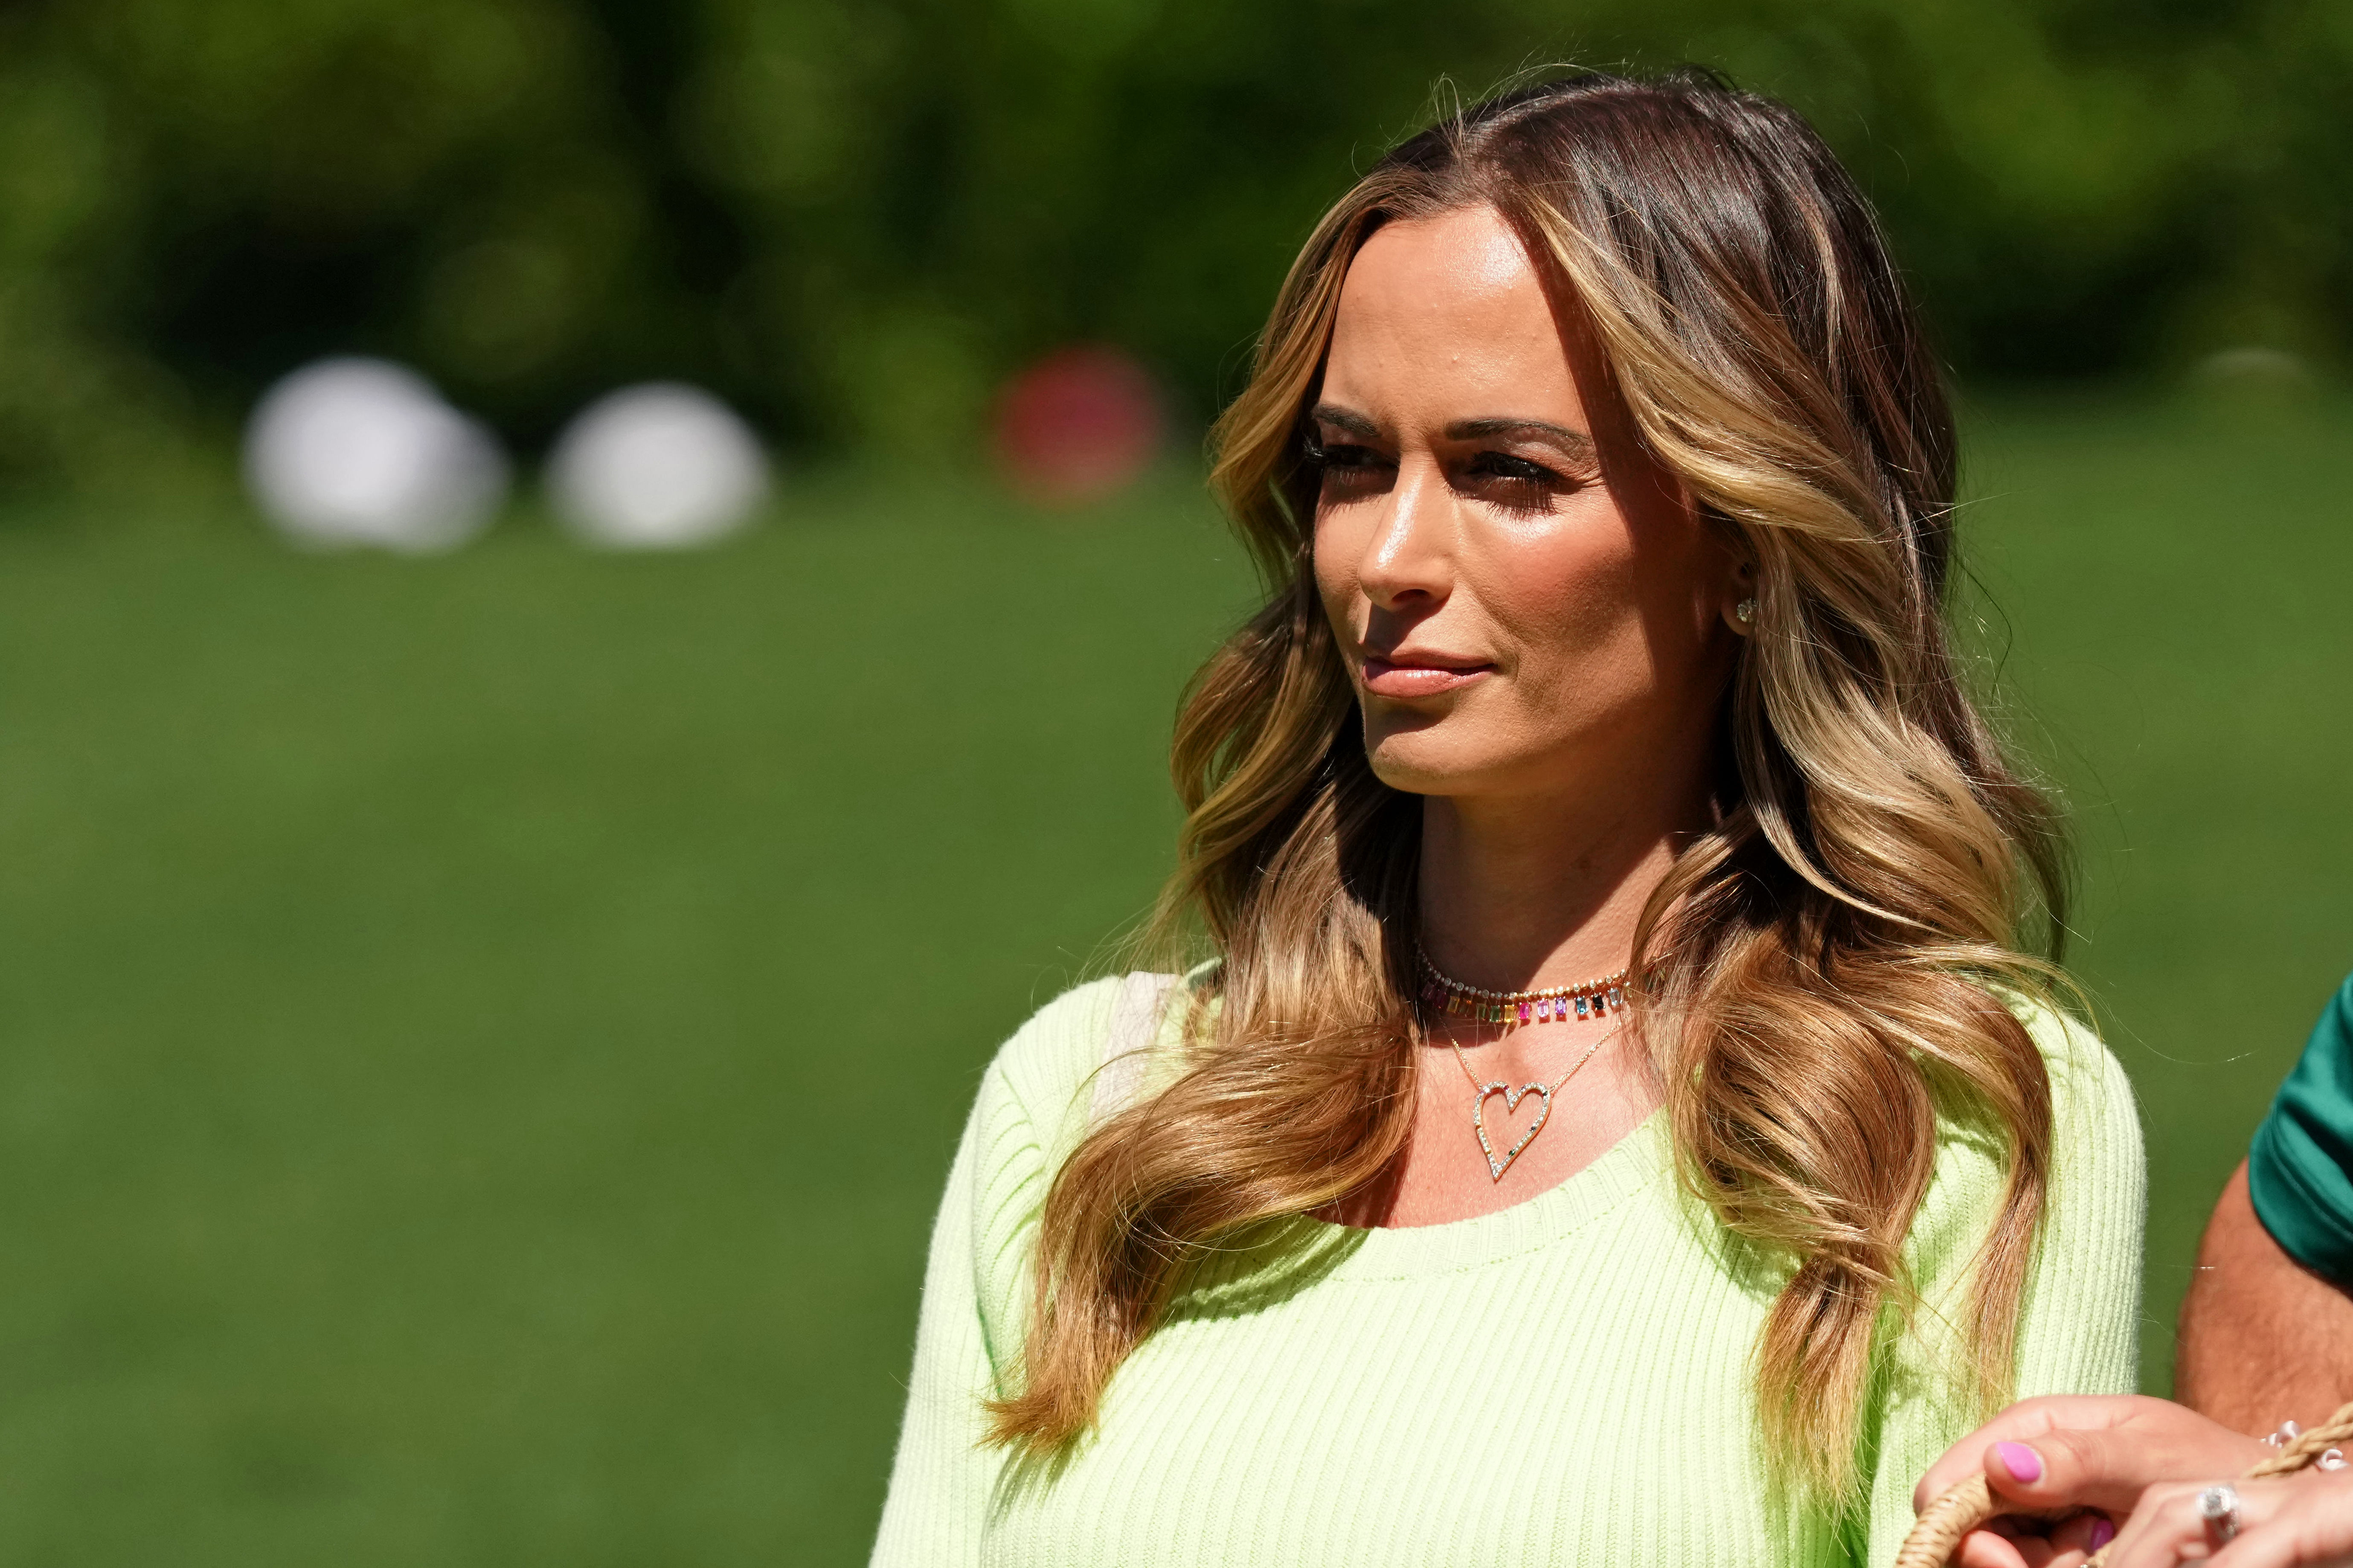 Jena Sims opened up on her insecurity (Picture credit: IMAGN)